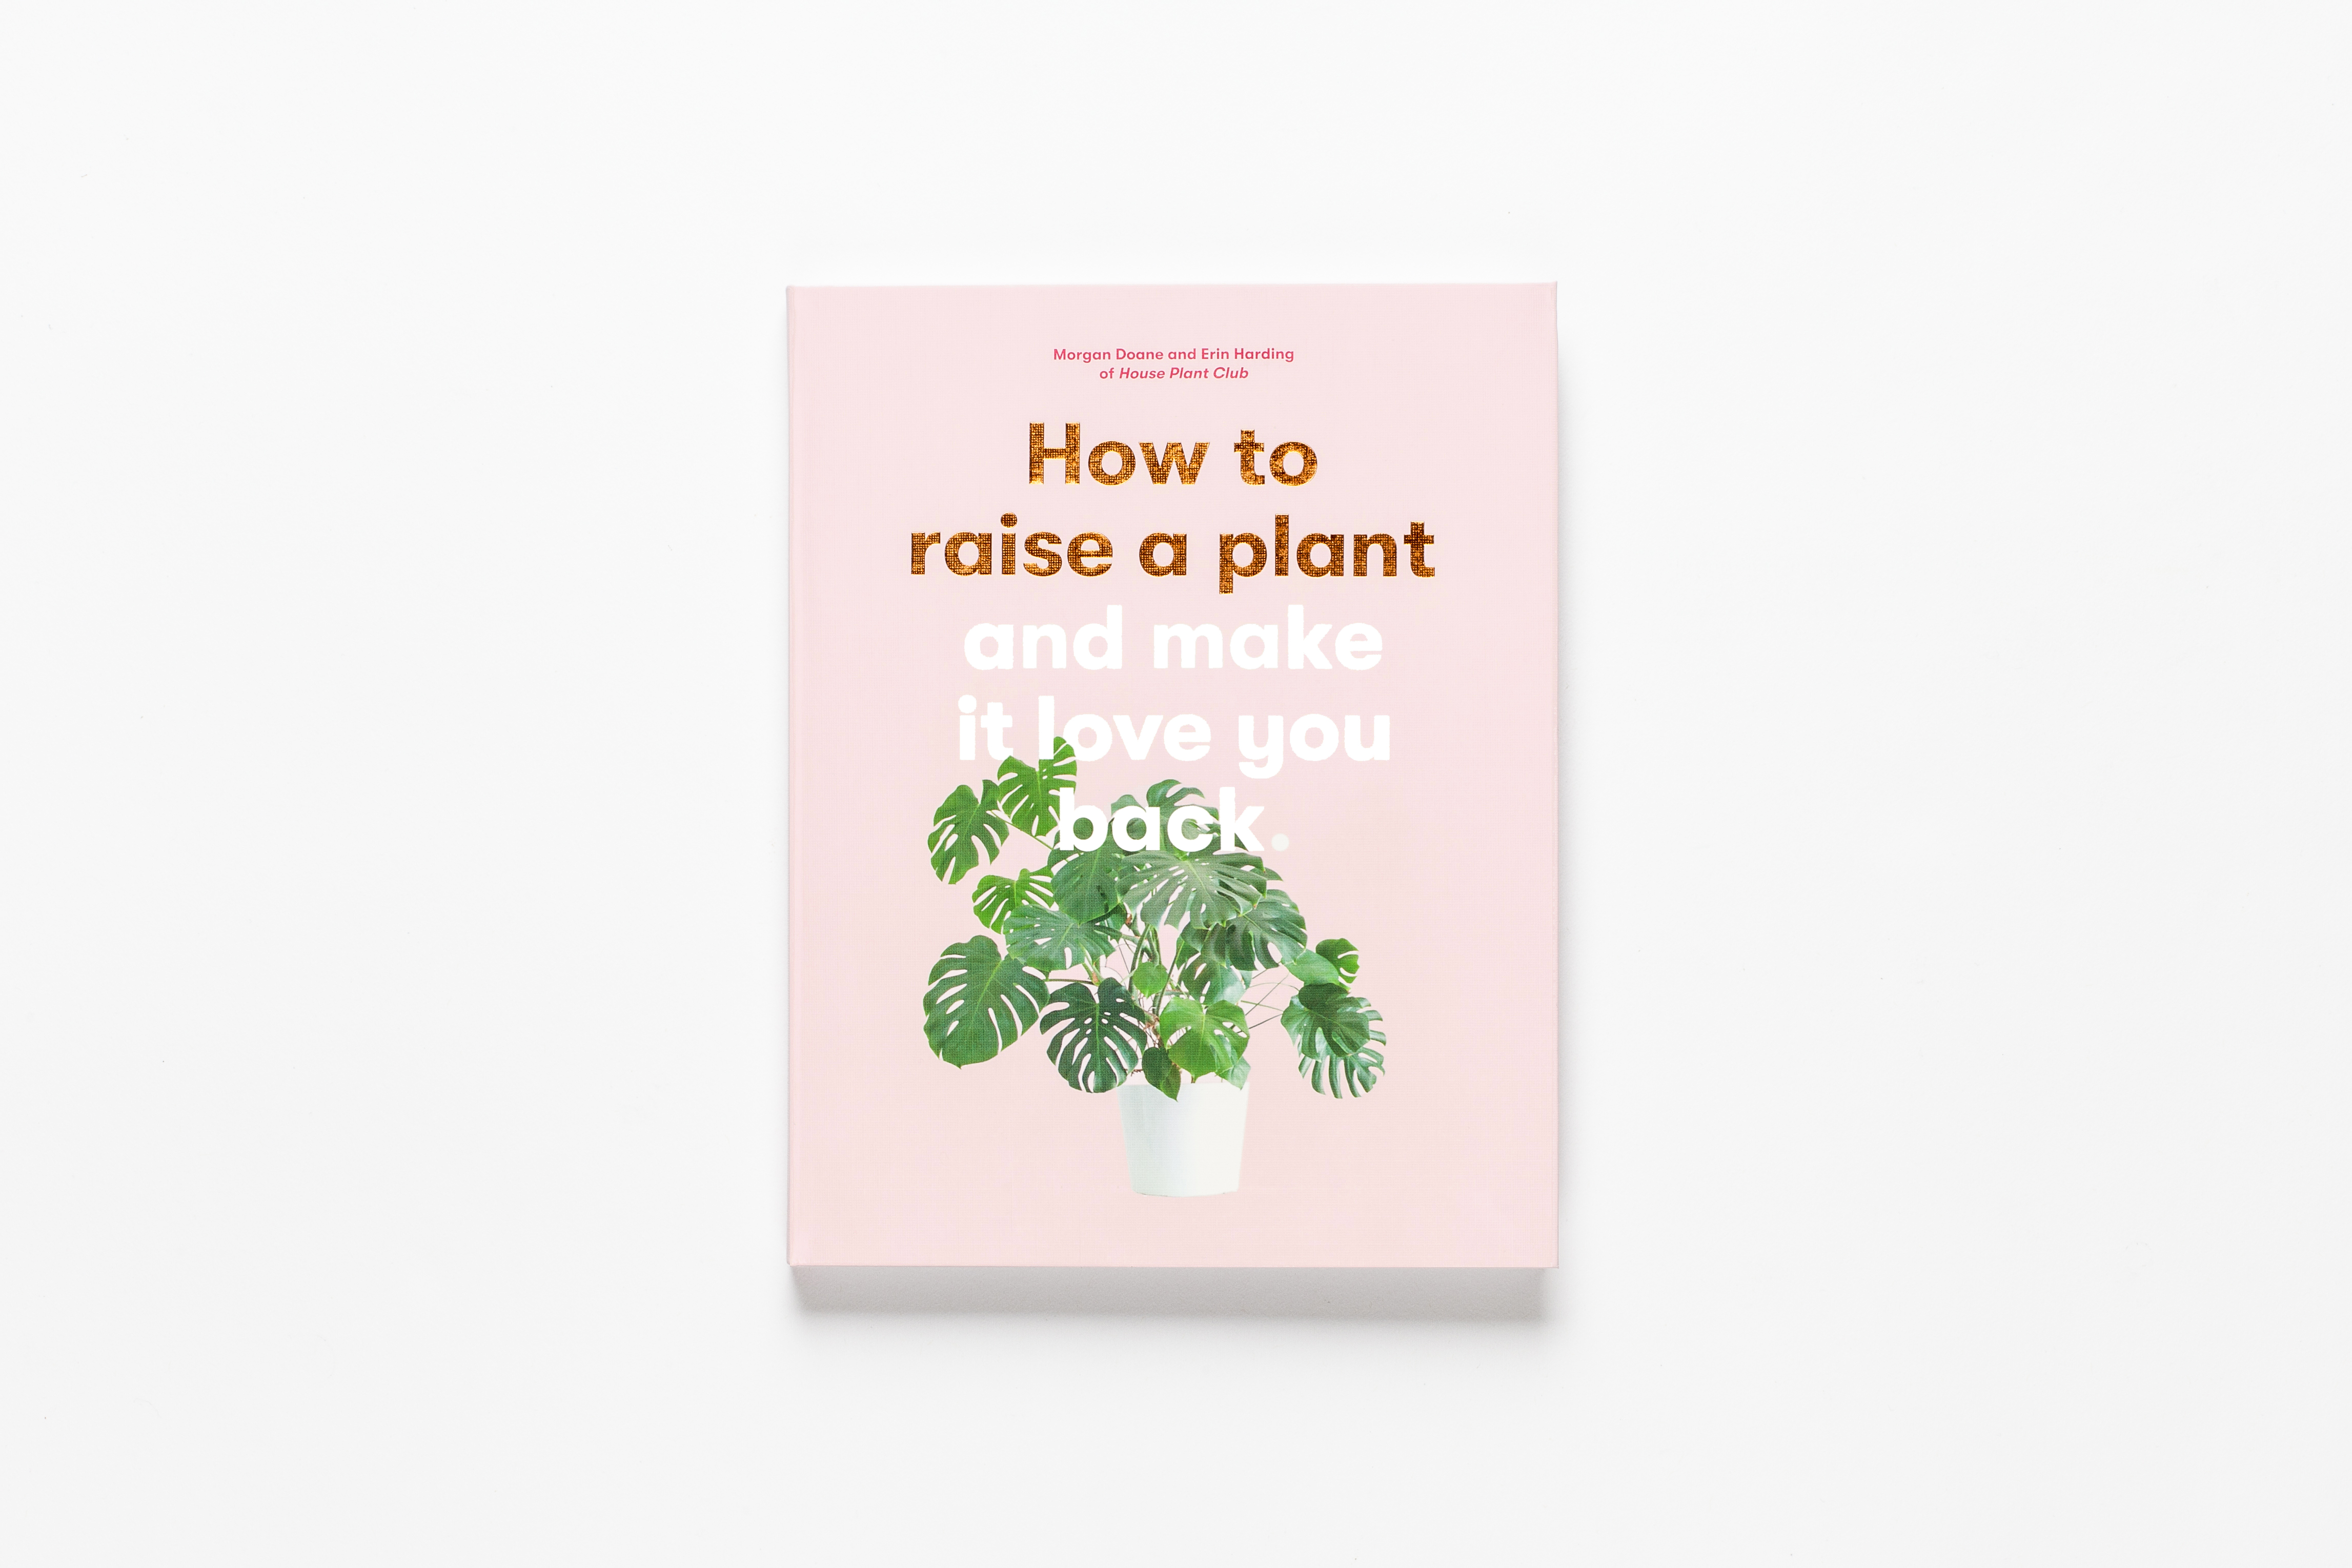 From How to Raise a Plant (and Make it Love You Back). Courtesy of Laurence King Publishing.